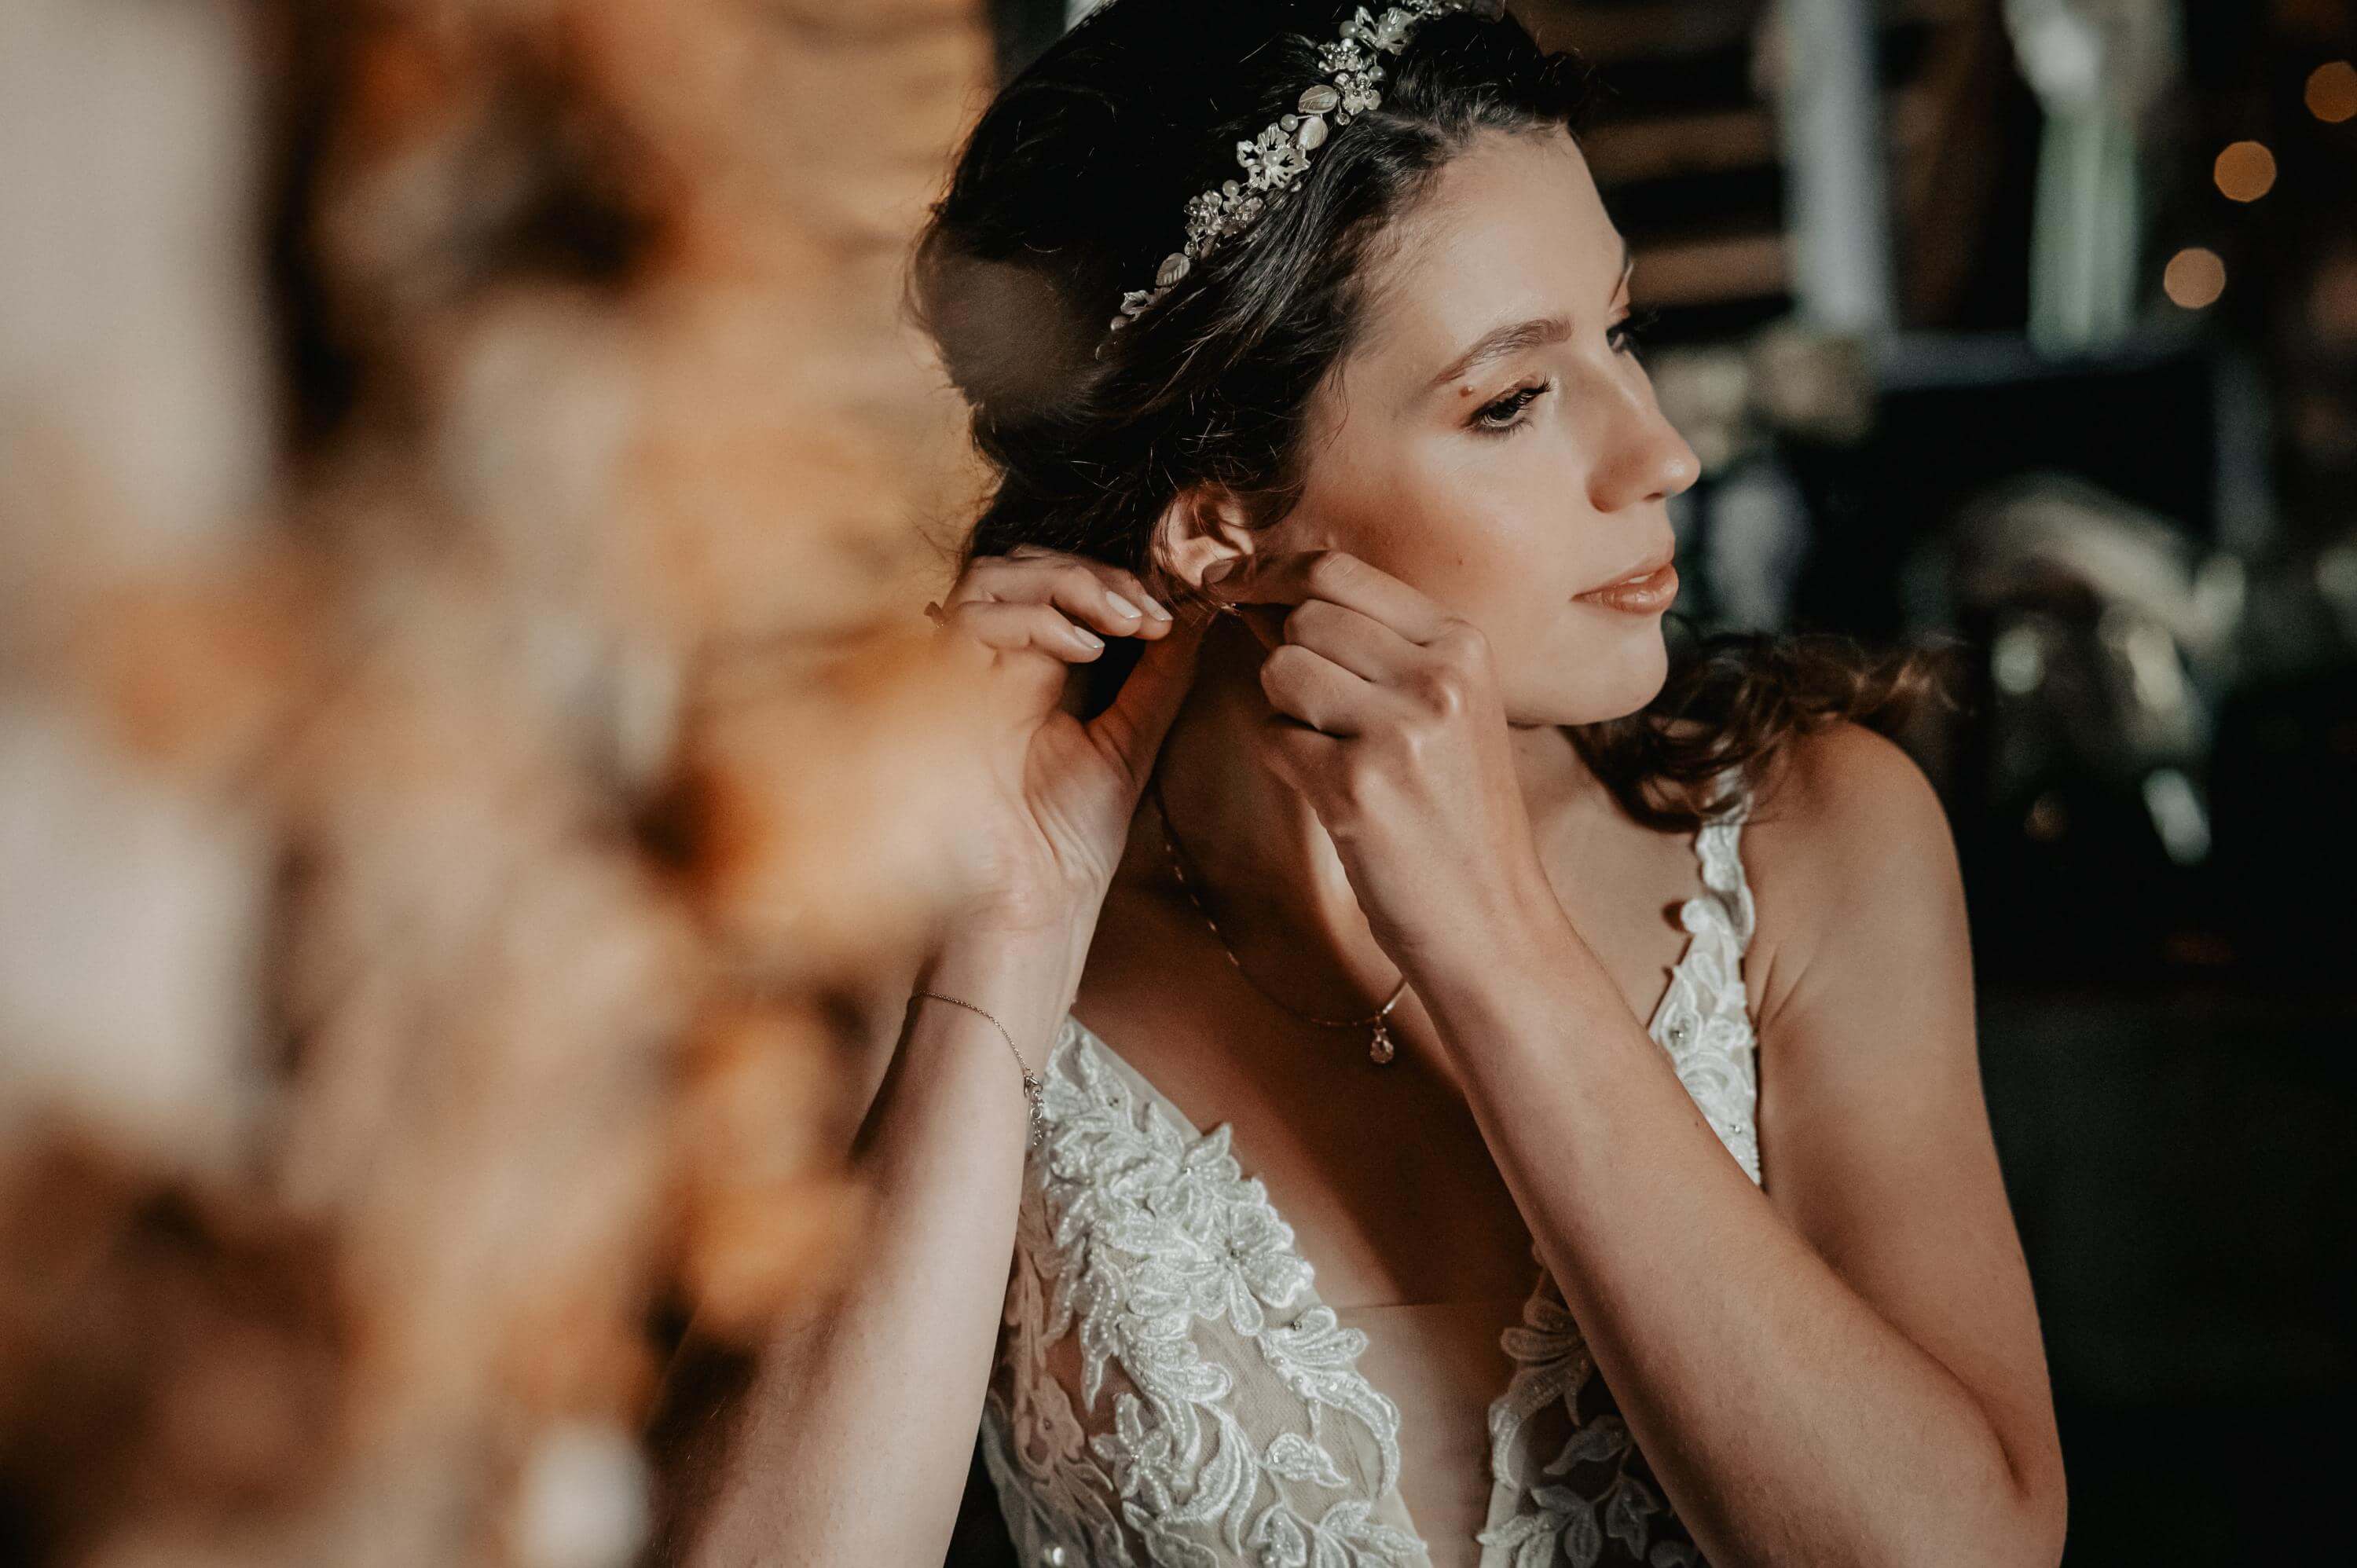 With a concentrated look to the side in the mirror, the bride puts on an earring while getting ready.